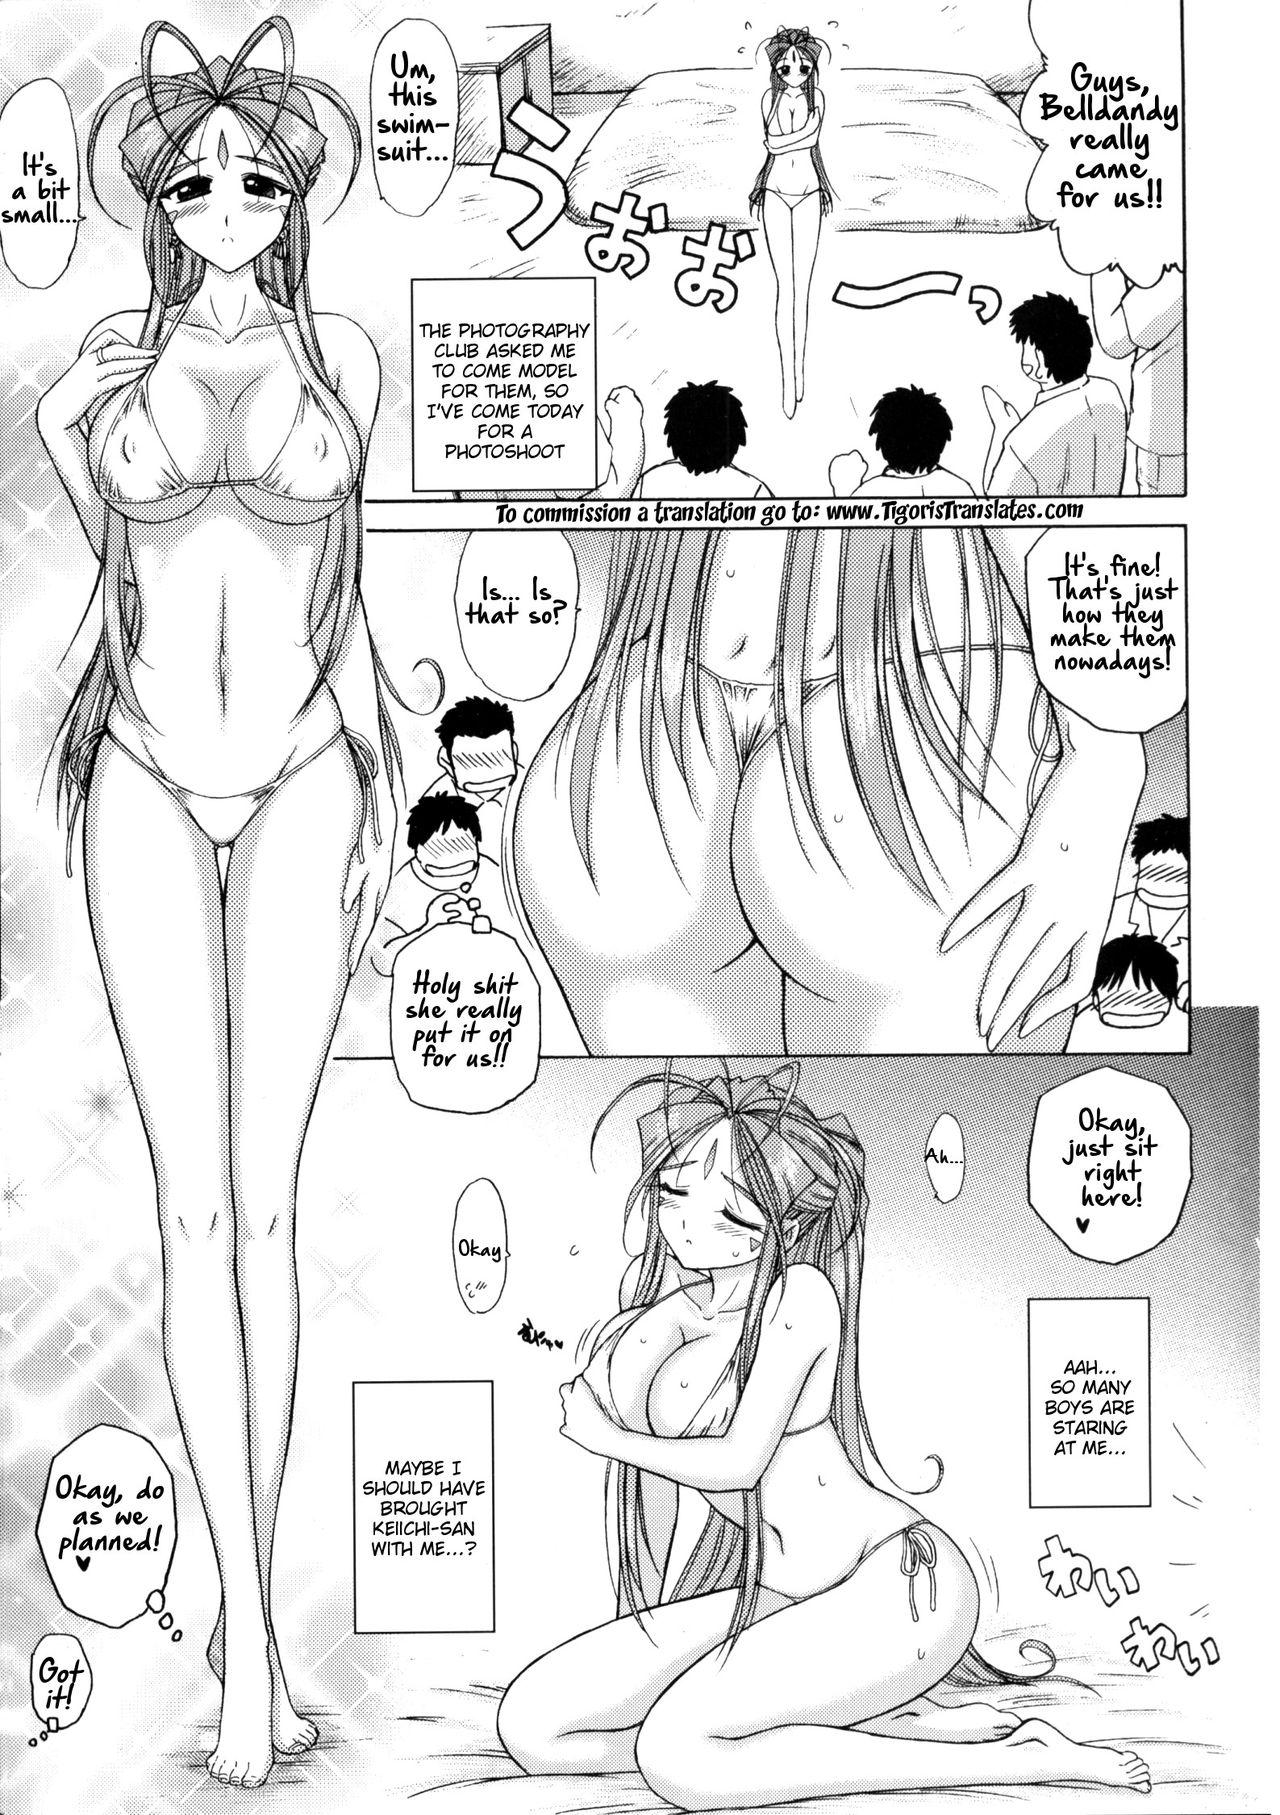 Big Cock Submission Sailormoon After/Midgard - Sailor moon Ah my goddess Free Hardcore Porn - Page 12